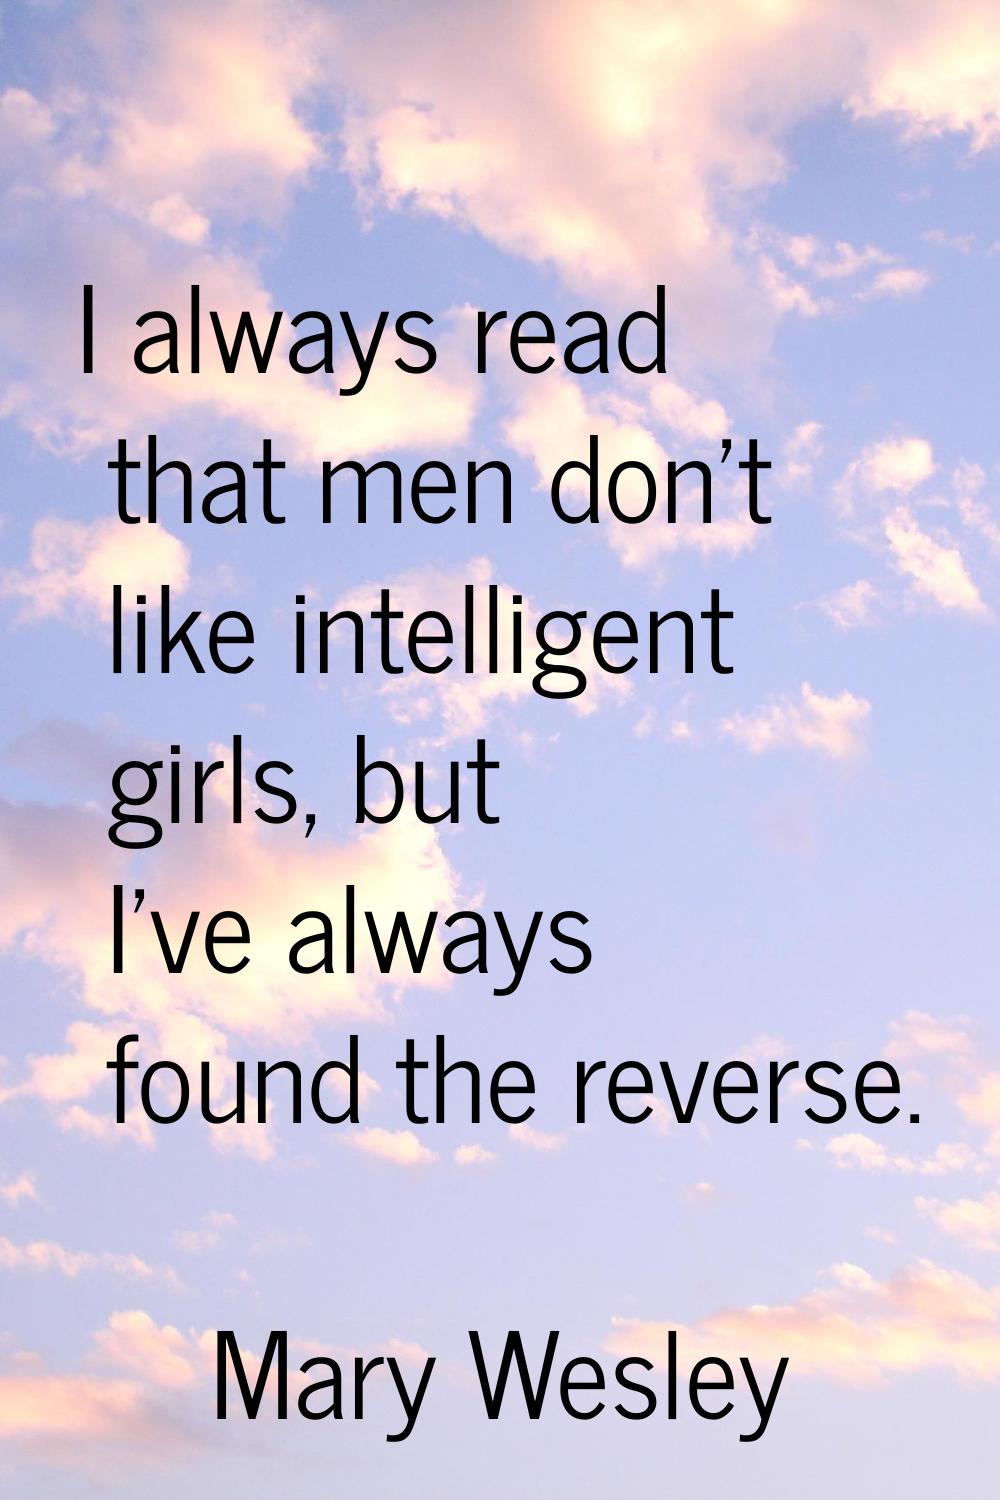 I always read that men don't like intelligent girls, but I've always found the reverse.